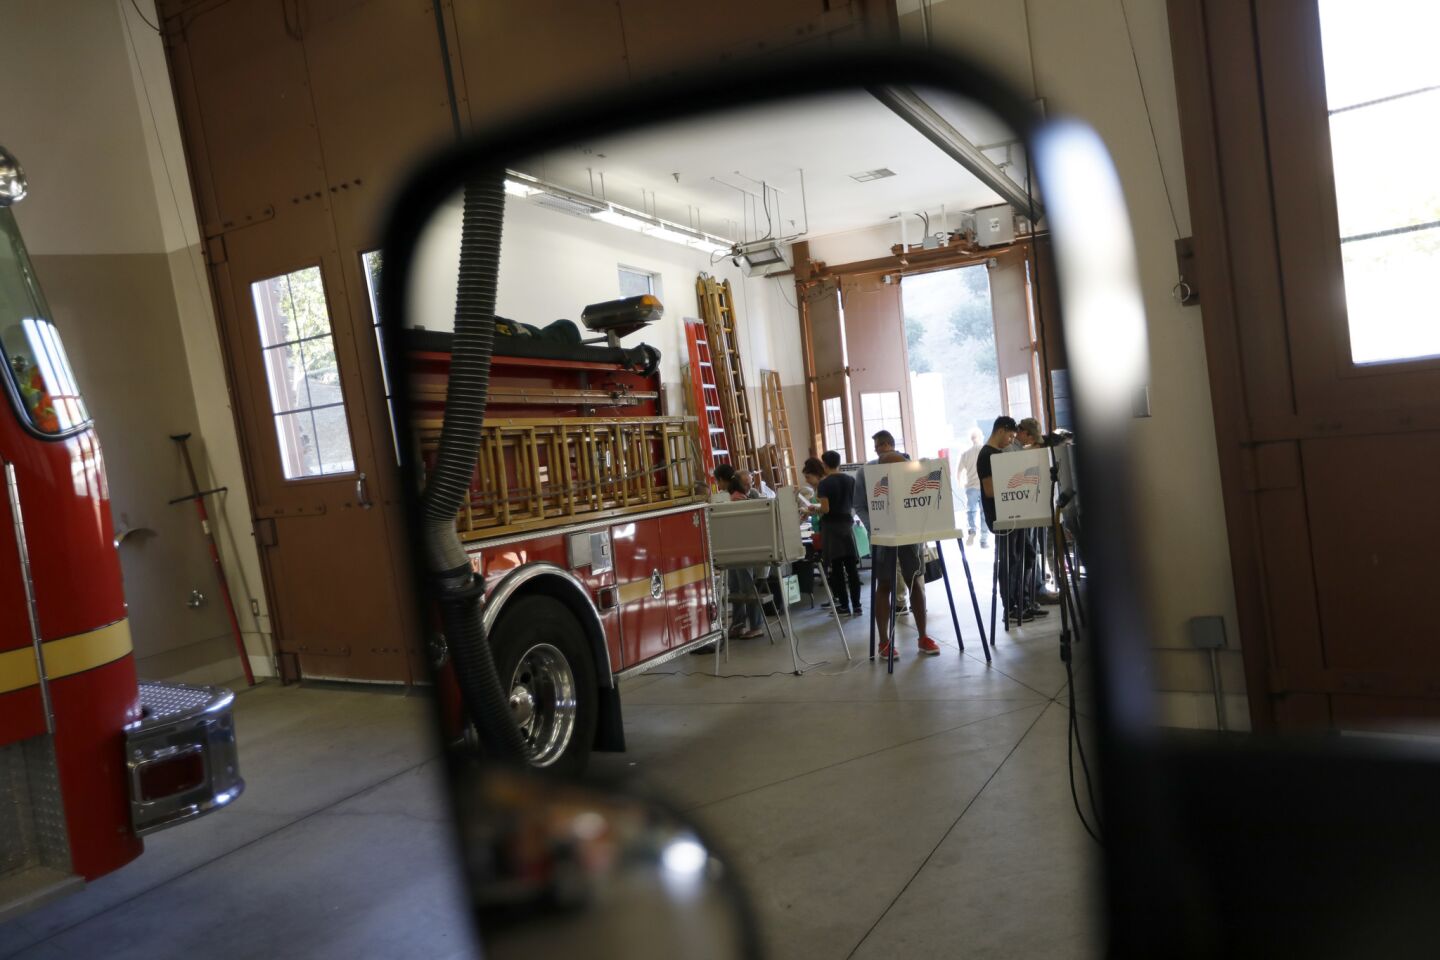 Voters fill the booths Tuesday at Los Angeles County Fire Station No. 124 in Stevenson Ranch, Calif.